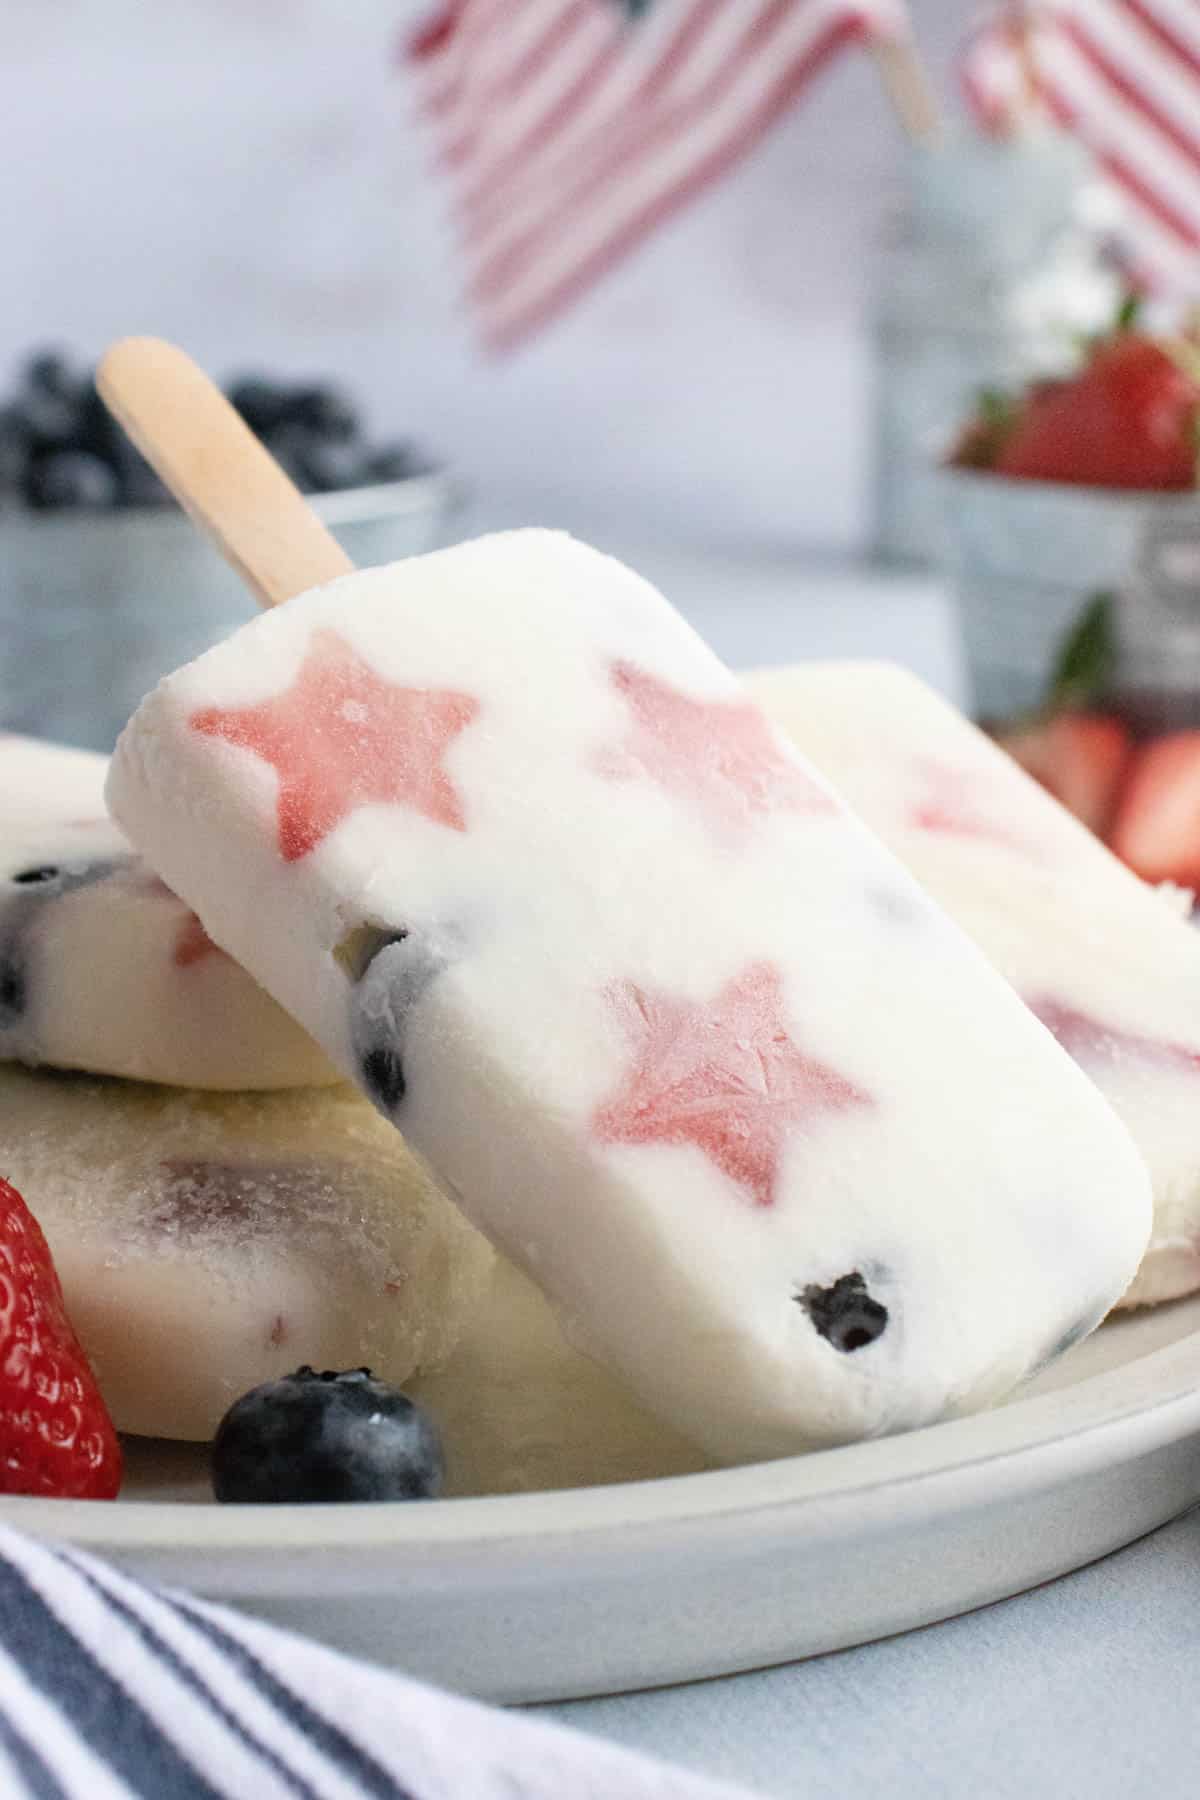 A creamy yogurt popsicle with strawberry stars and blueberries.